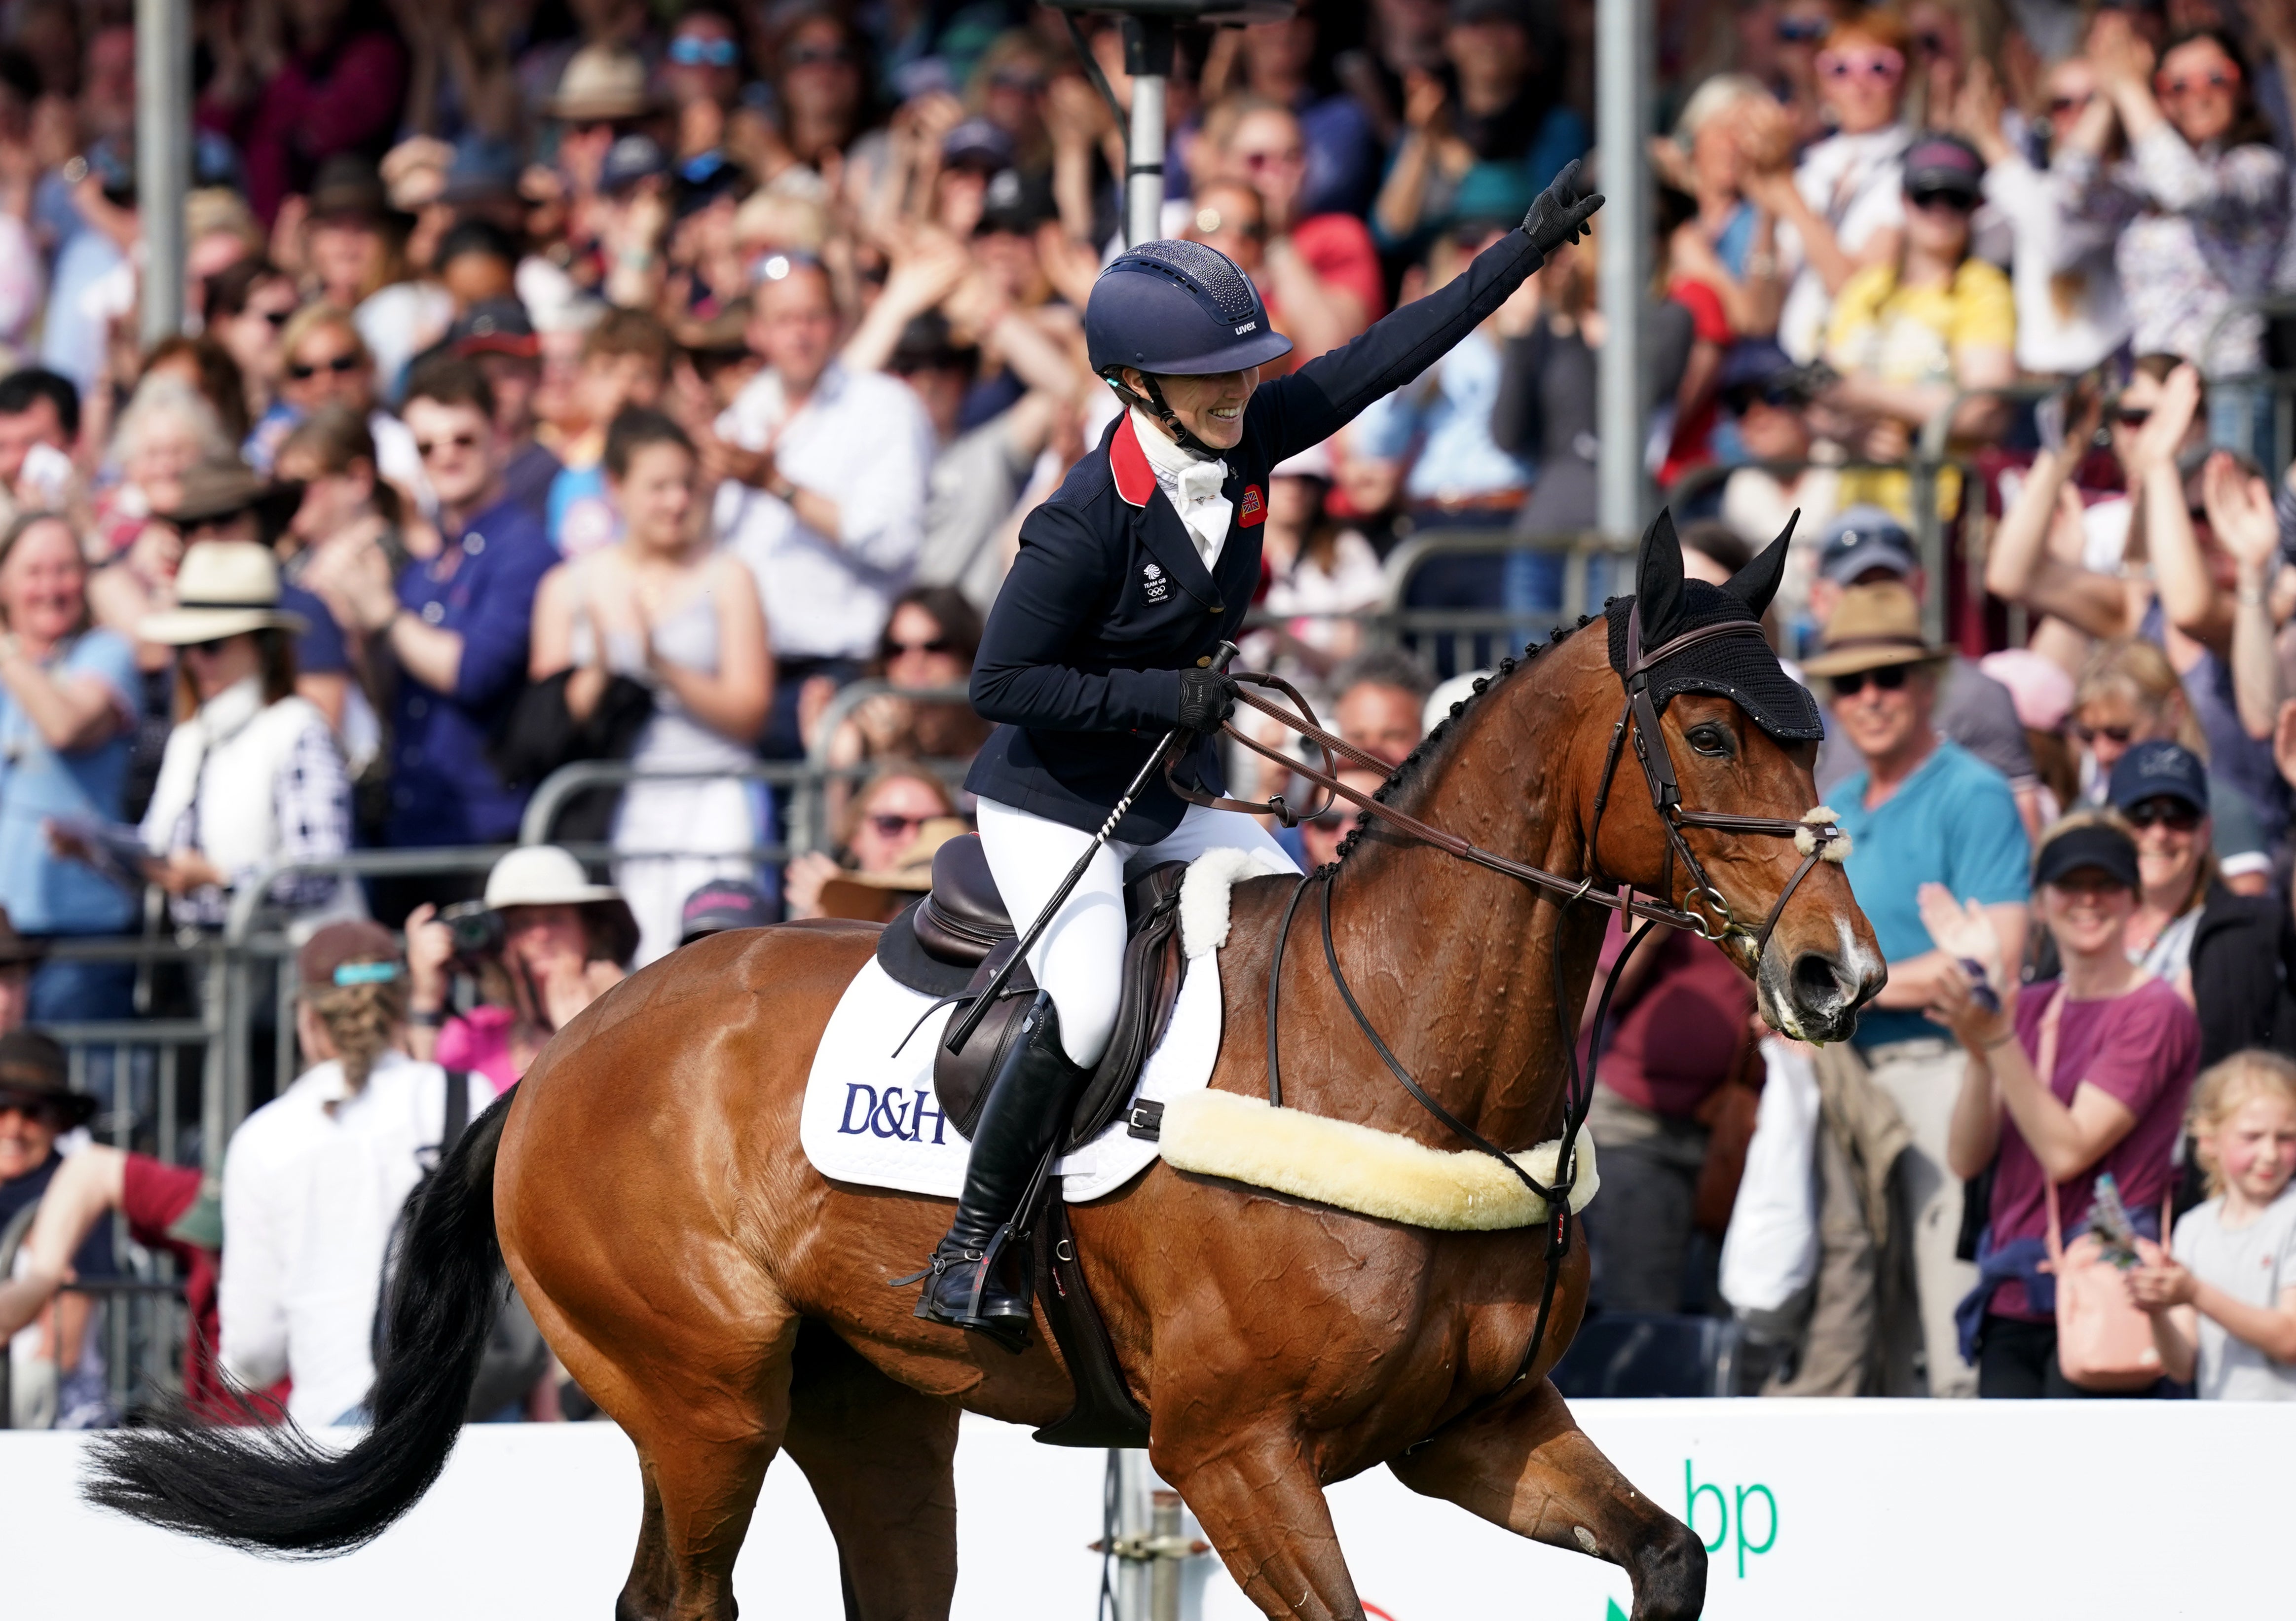 Laura Collett celebrates her victory at the Badminton Horse Trials (Steve Parsons/PA)